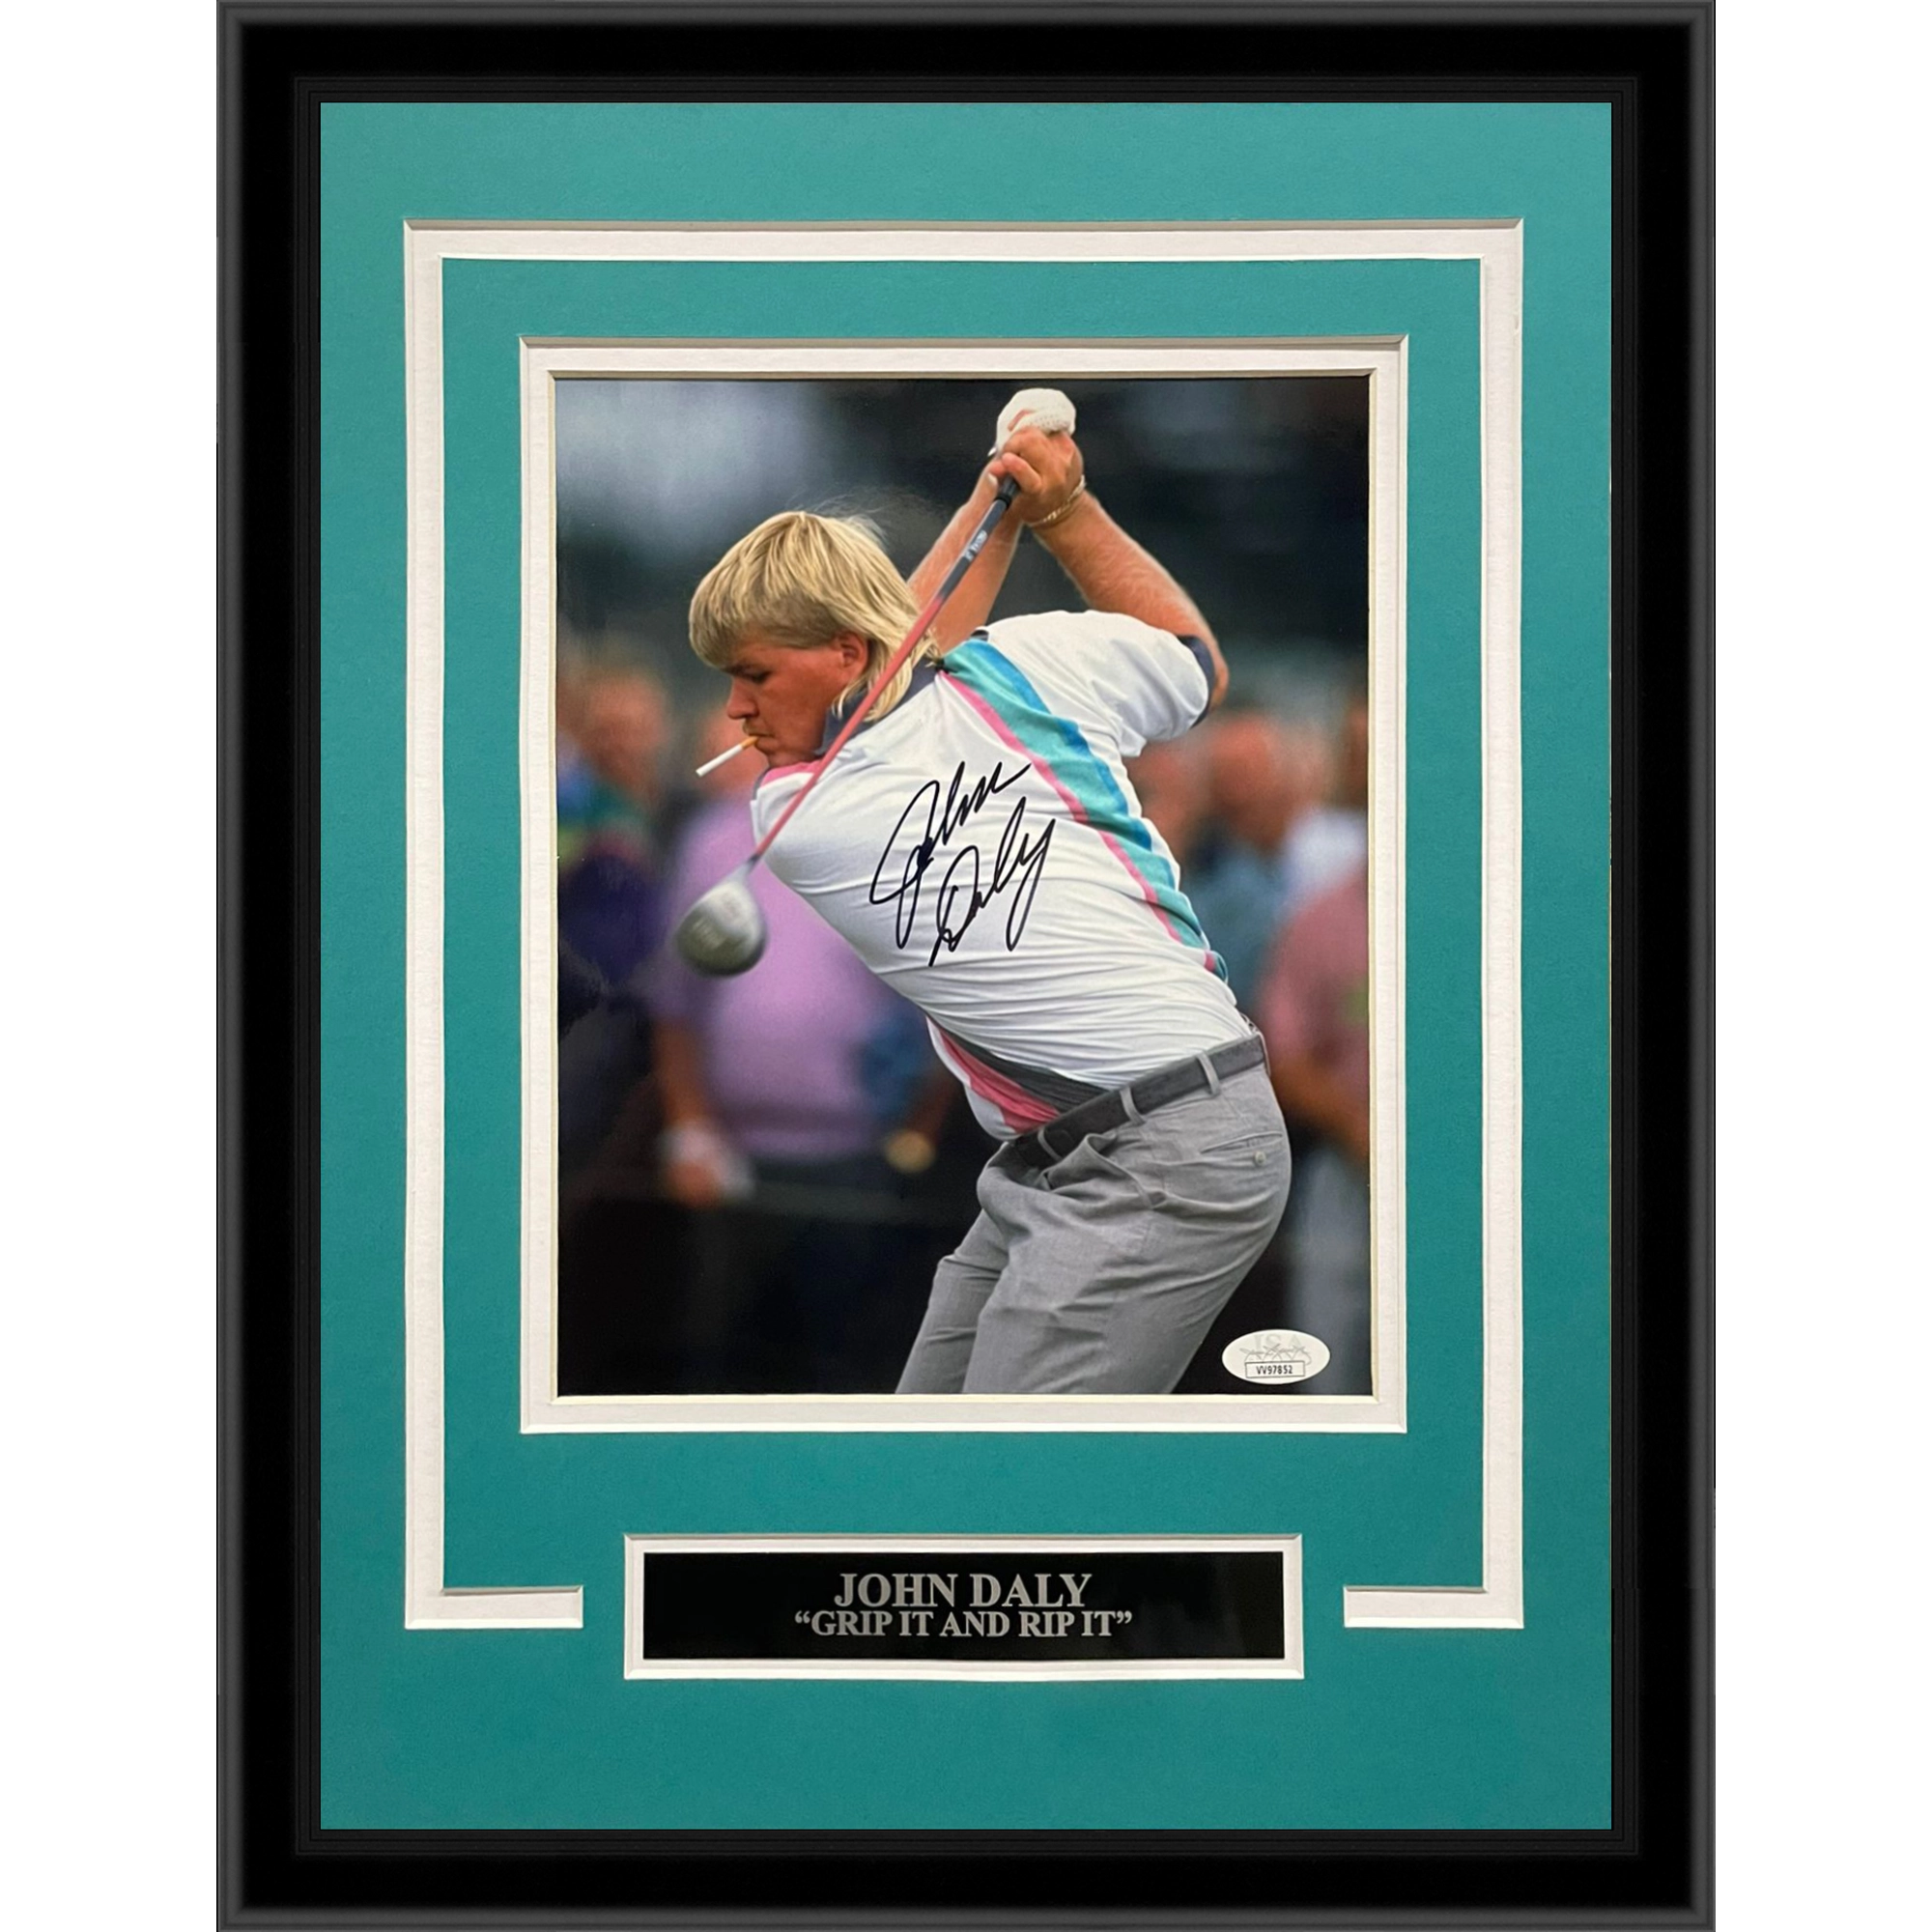 John Daly Autographed Golf (Smoking Cigarette) Deluxe Framed 8x10 Photo - JSA